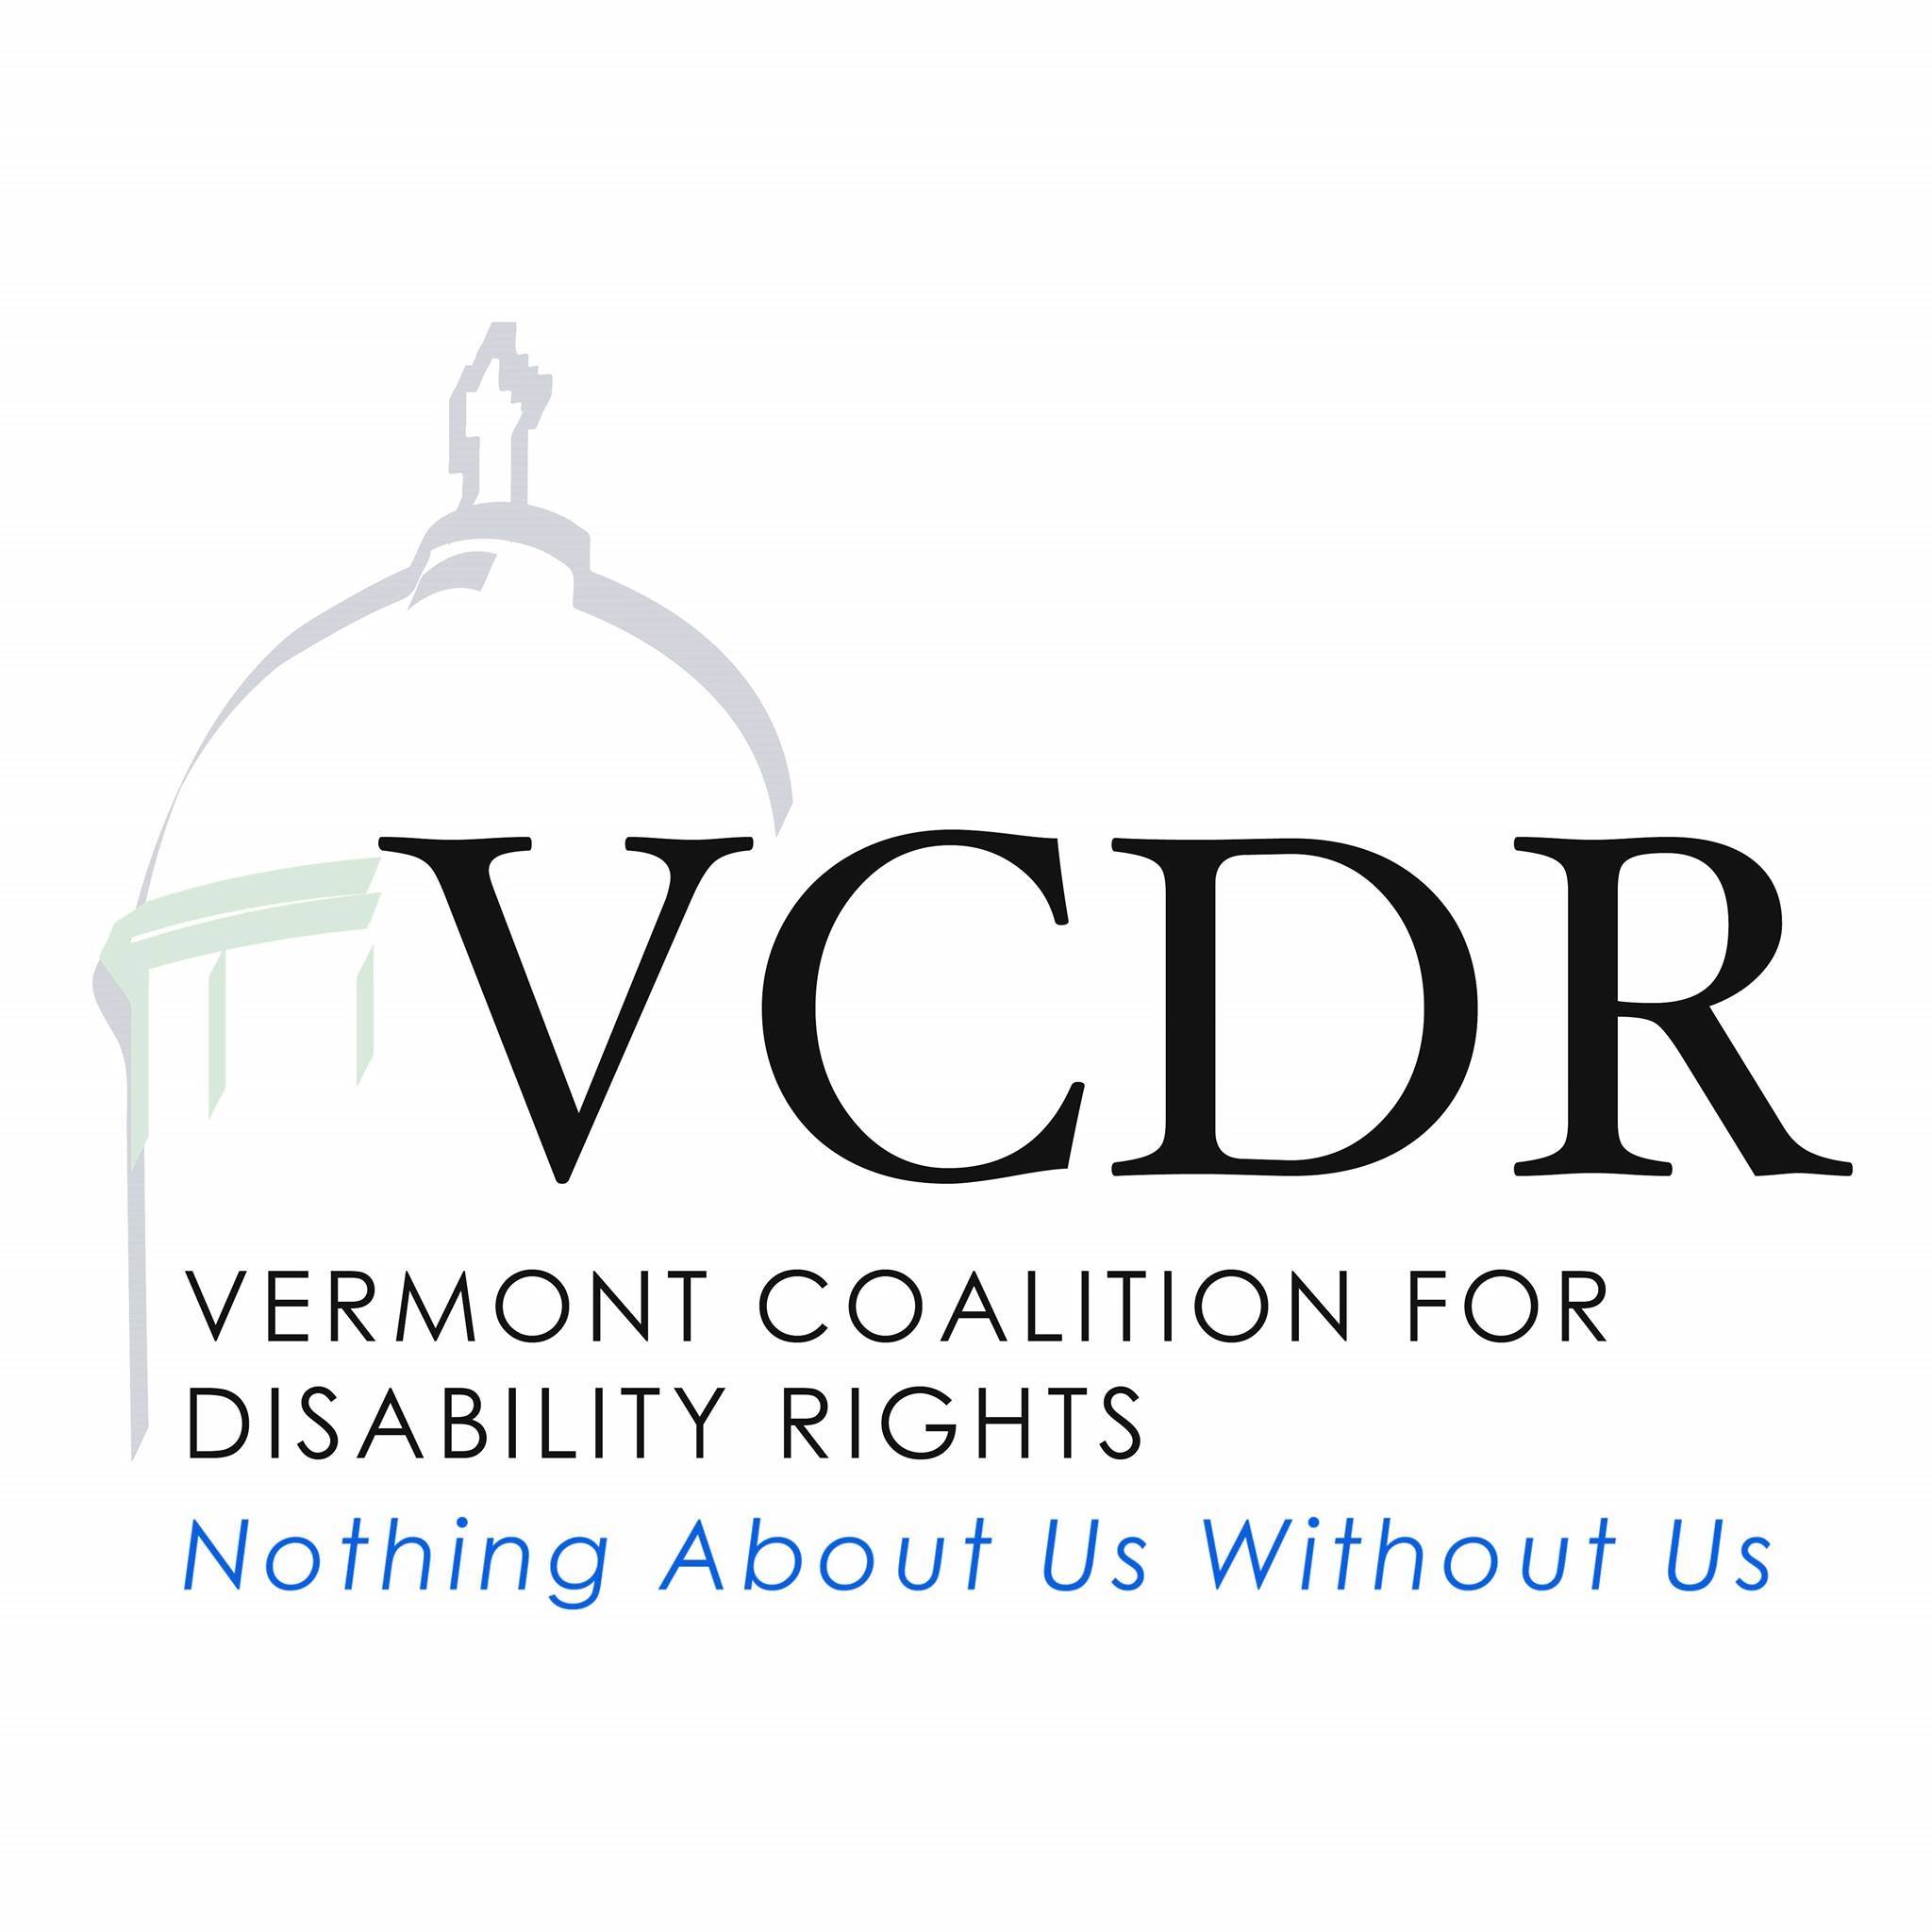 Vermont Coalition for Disability Rights